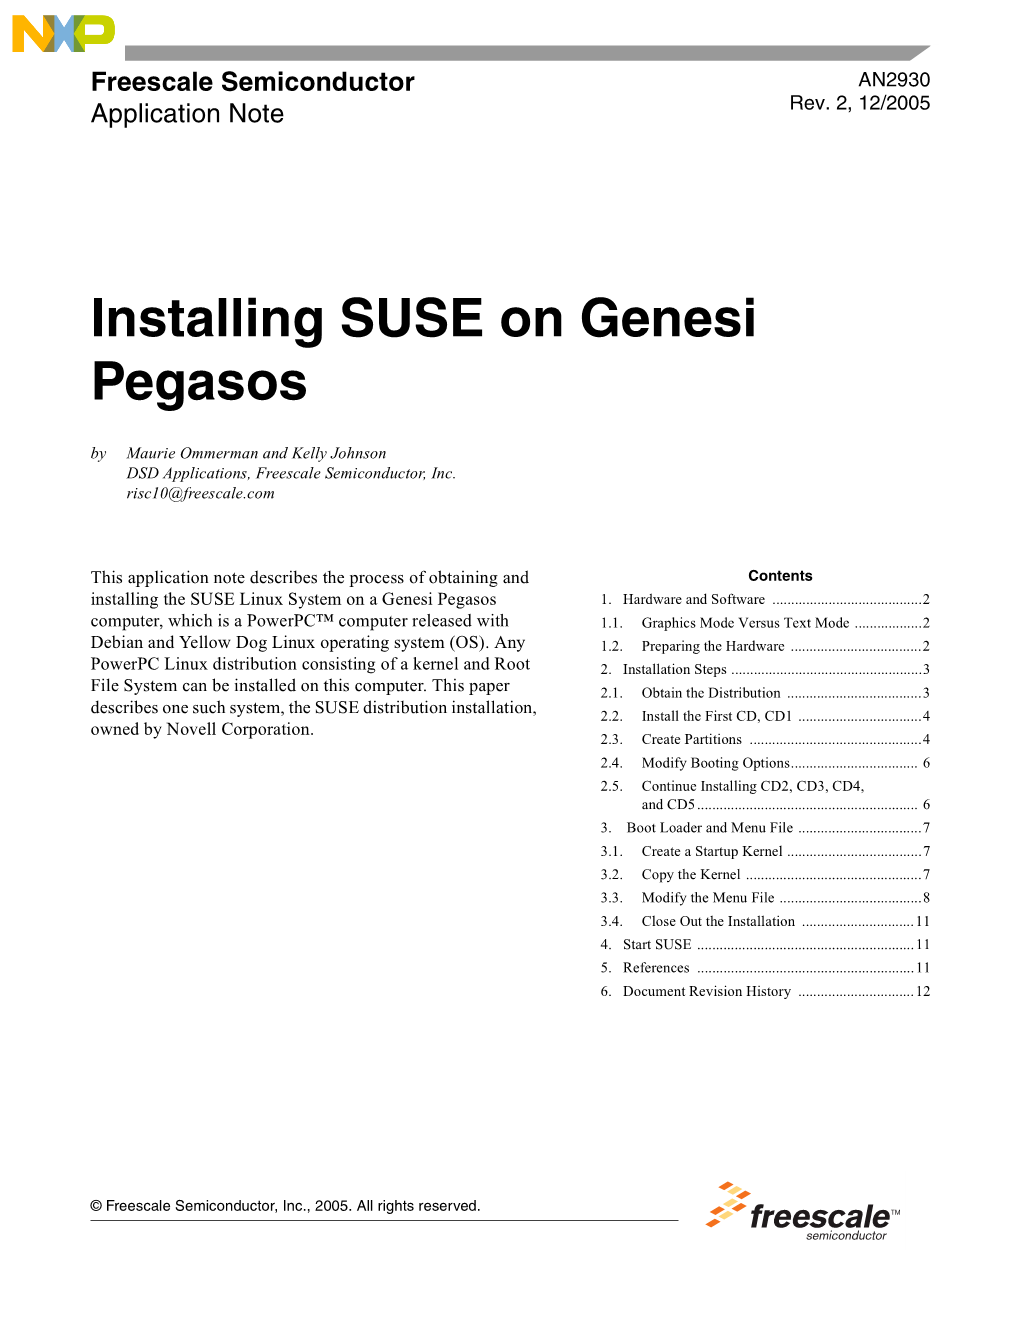 Installing SUSE on Genesi Pegasos by Maurie Ommerman and Kelly Johnson DSD Applications, Freescale Semiconductor, Inc